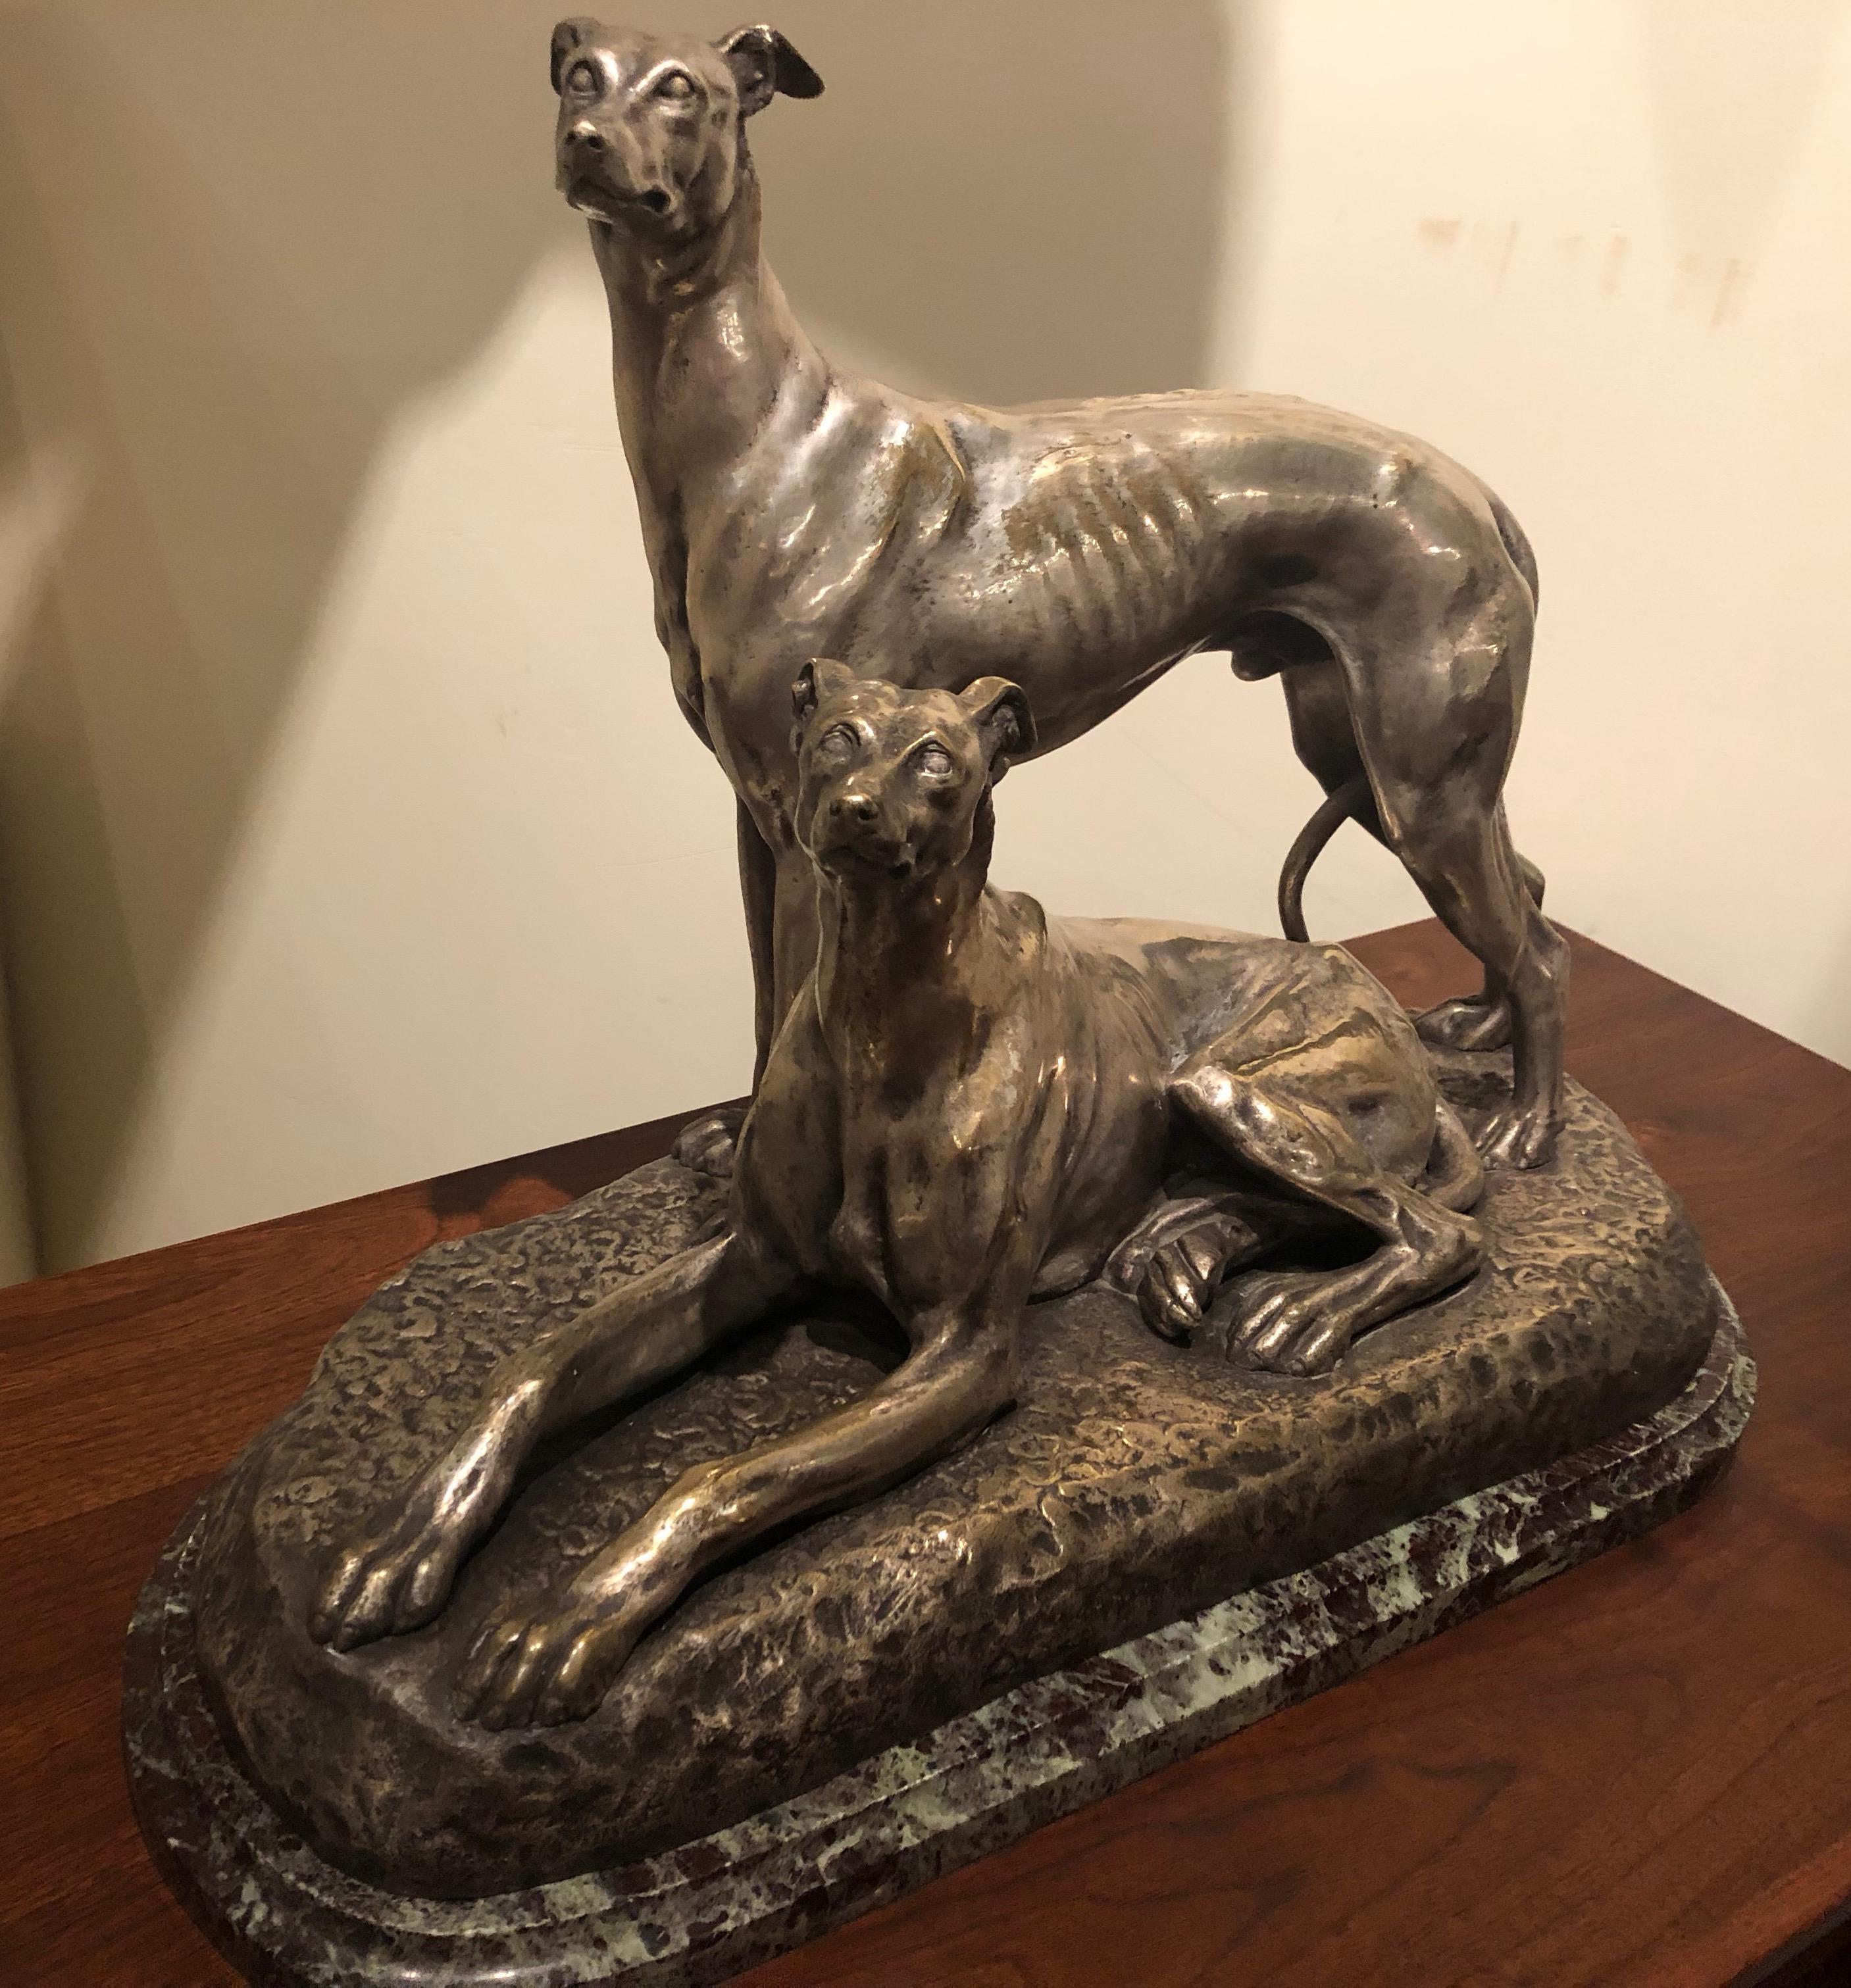 Two Greyhound Dogs is a nickeled bronze sculpture by French artist Suzanne Bizard. It is a stylized figural and accurate rendering of a pair of greyhound dogs relaxed in situ. The stunning quality shows this breed's many physical characteristics: